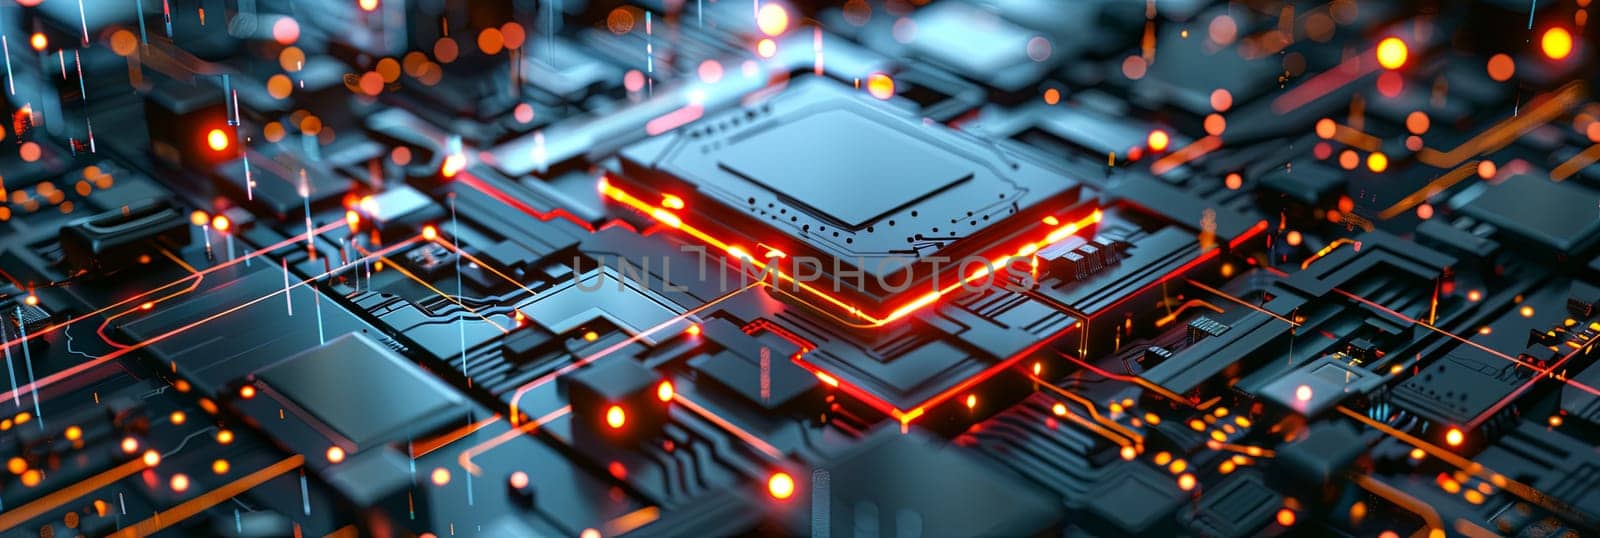 A close-up view of a modern microprocessor on a motherboard, surrounded by intricate digital data streams and glowing light effects, symbolizing the processing power of AI.